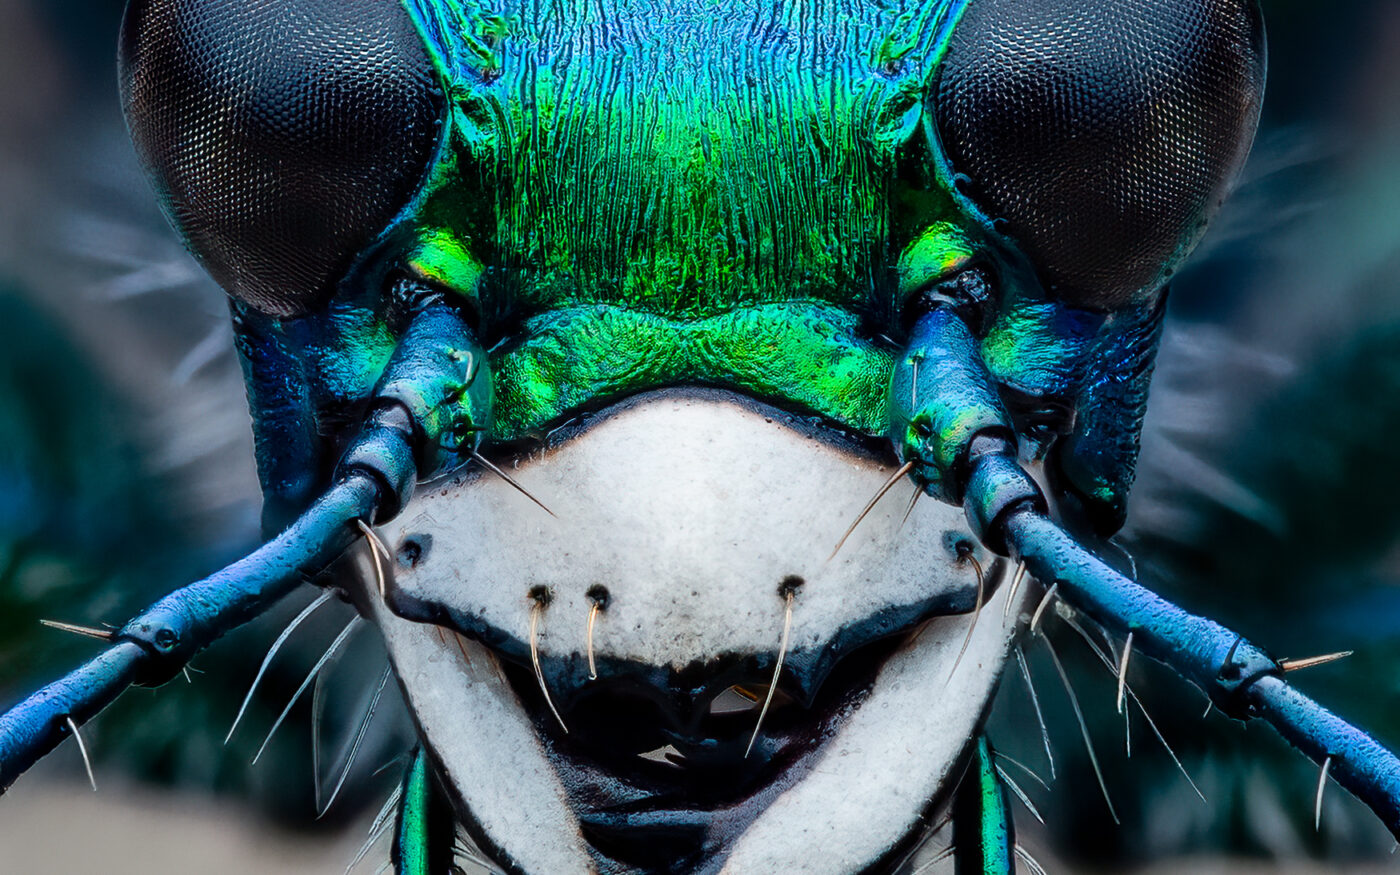 51 shot handheld focus stack of a living six-spotted tiger beetle found resting under some bark of a downed tree.